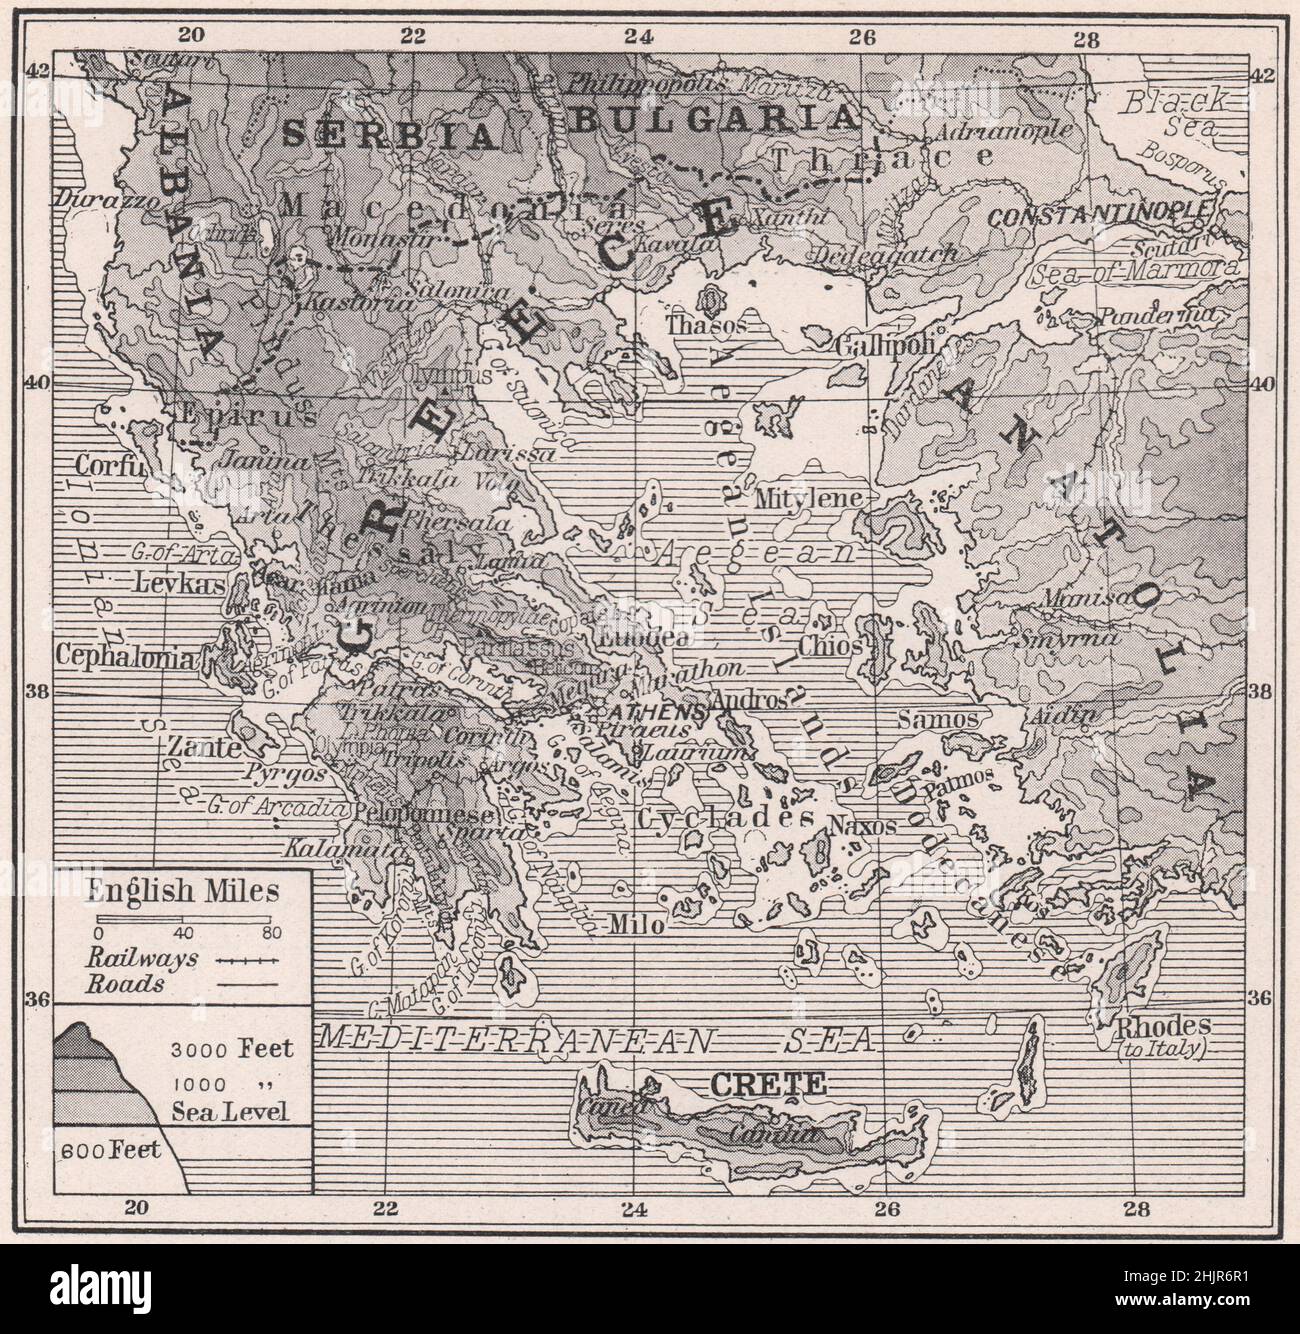 Mountainous promontories and scattered Isles of Greece (1923 map) Stock Photo